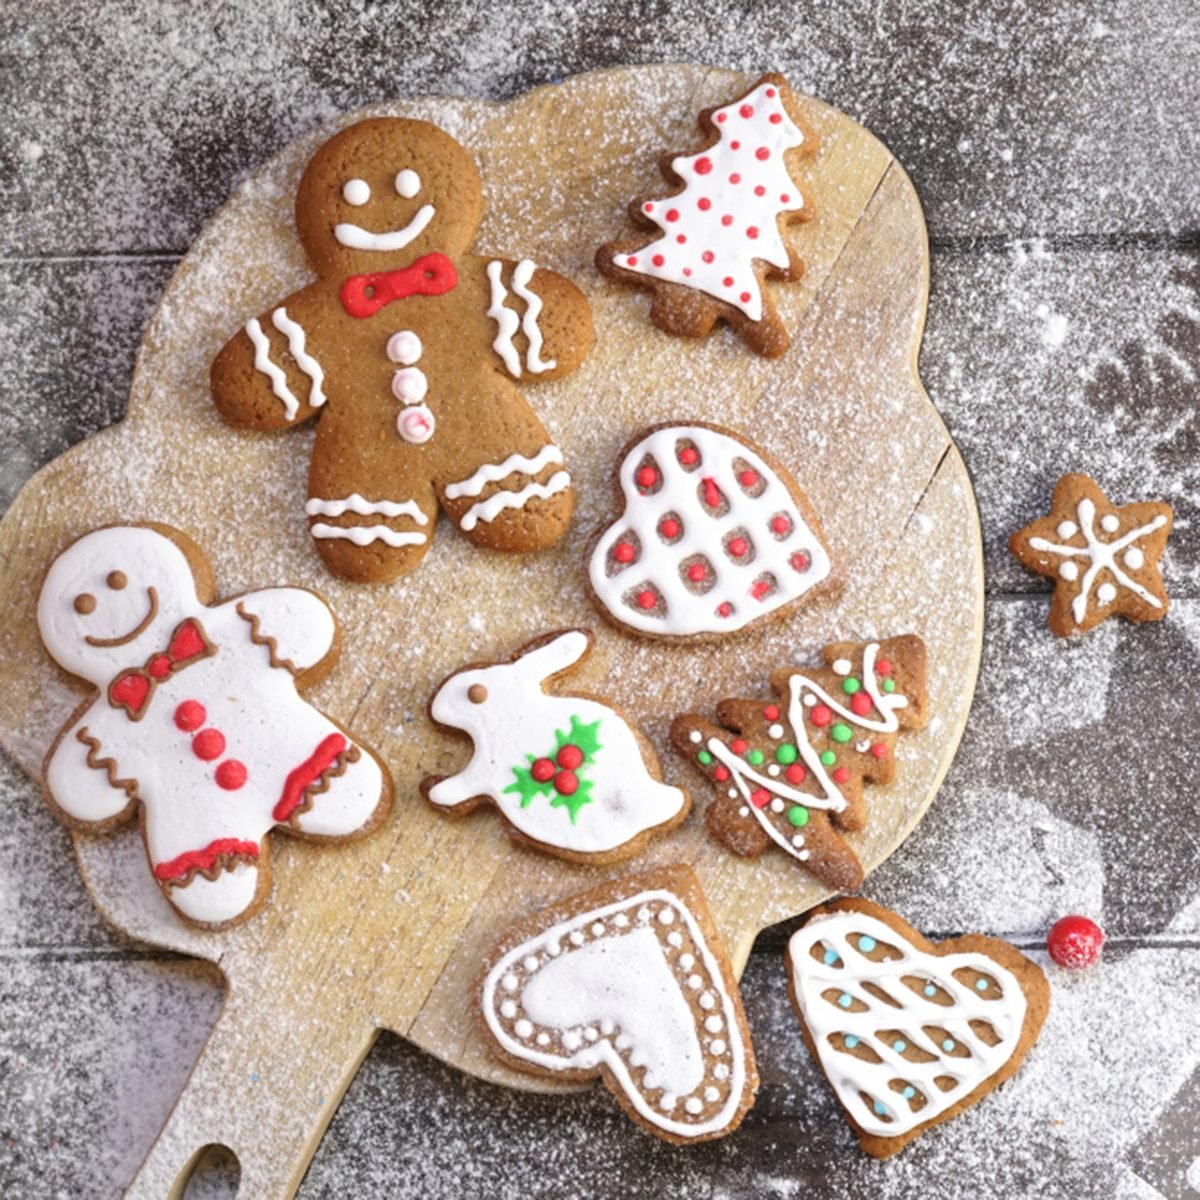 Christmas cookies of various shapes in sugar glaze on a cutting board on a brown wooden table sprinkled with flour, flat lay.